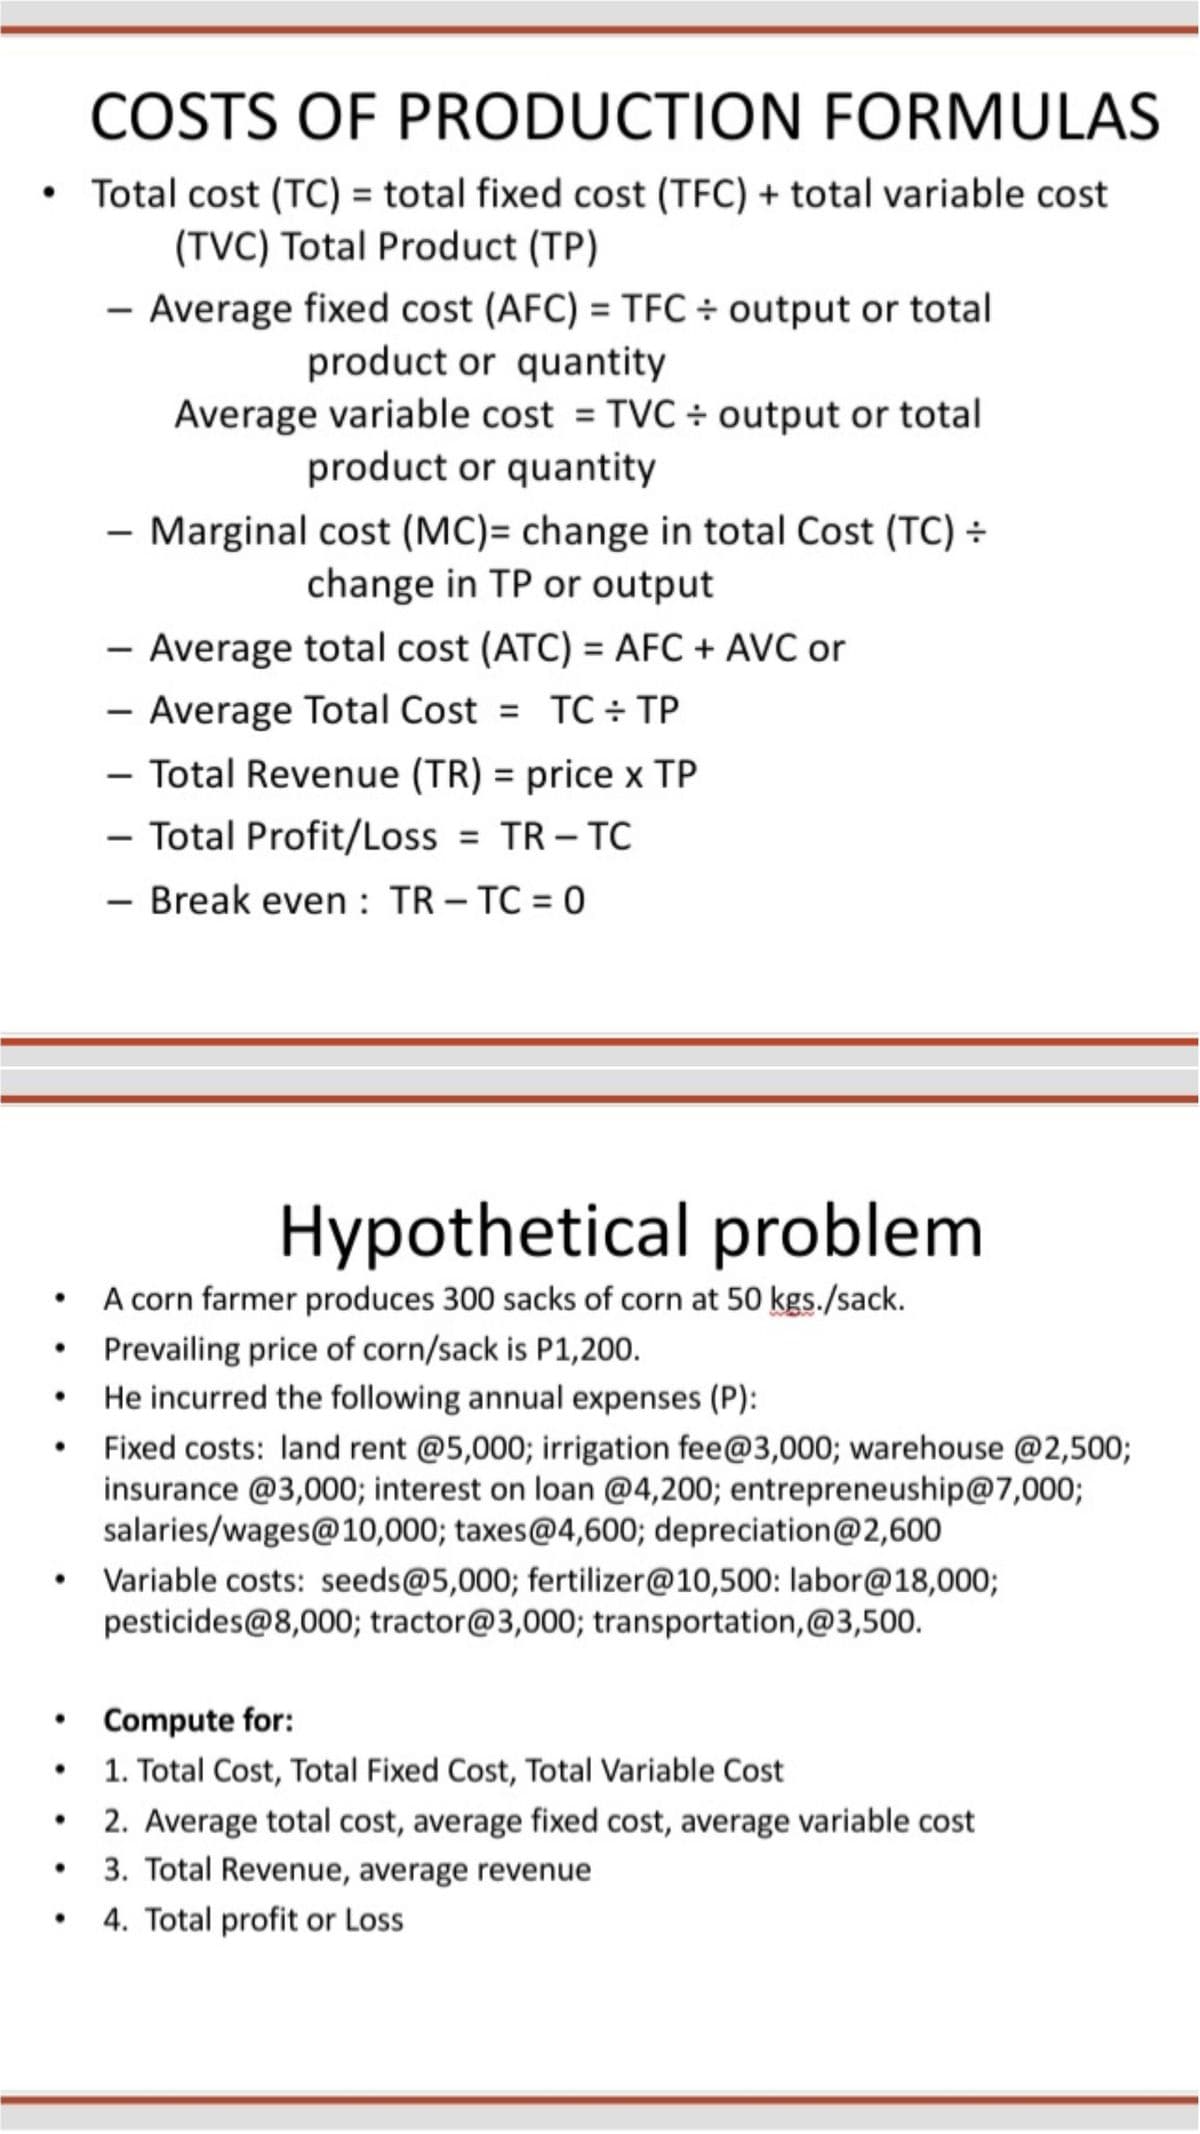 COSTS OF PRODUCTION FORMULAS
Total cost (TC) = total fixed cost (TFC) + total variable cost
(TVC) Total Product (TP)
- Average fixed cost (AFC) = TFC ÷ output or total
product or quantity
Average variable cost = TVC ÷ output or total
product or quantity
|
- Marginal cost (MC)= change in total Cost (TC) ÷
change in TP or output
|
- Average total cost (ATC) = AFC + AVC or
- Average Total Cost = TC ÷ TP
- Total Revenue (TR) = price x TP
Total Profit/Loss = TR – TC
- Break even : TR – TC = 0
|
|
Hypothetical problem
A corn farmer produces 300 sacks of corn at 50 kgs./sack.
Prevailing price of corn/sack is P1,200.
• He incurred the following annual expenses (P):
• Fixed costs: land rent @5,000; irrigation fee@3,000; warehouse @2,500;
insurance @3,000; interest on loan @4,200; entrepreneuship@7,000;
salaries/wages@10,000; taxes@4,600; depreciation@2,600
Variable costs: seeds@5,000; fertilizer@10,500: labor@18,000;
pesticides@8,000; tractor@3,000; transportation,@3,500.
Compute for:
1. Total Cost, Total Fixed Cost, Total Variable Cost
2. Average total cost, average fixed cost, average variable cost
3. Total Revenue, average revenue
4. Total profit or Loss
